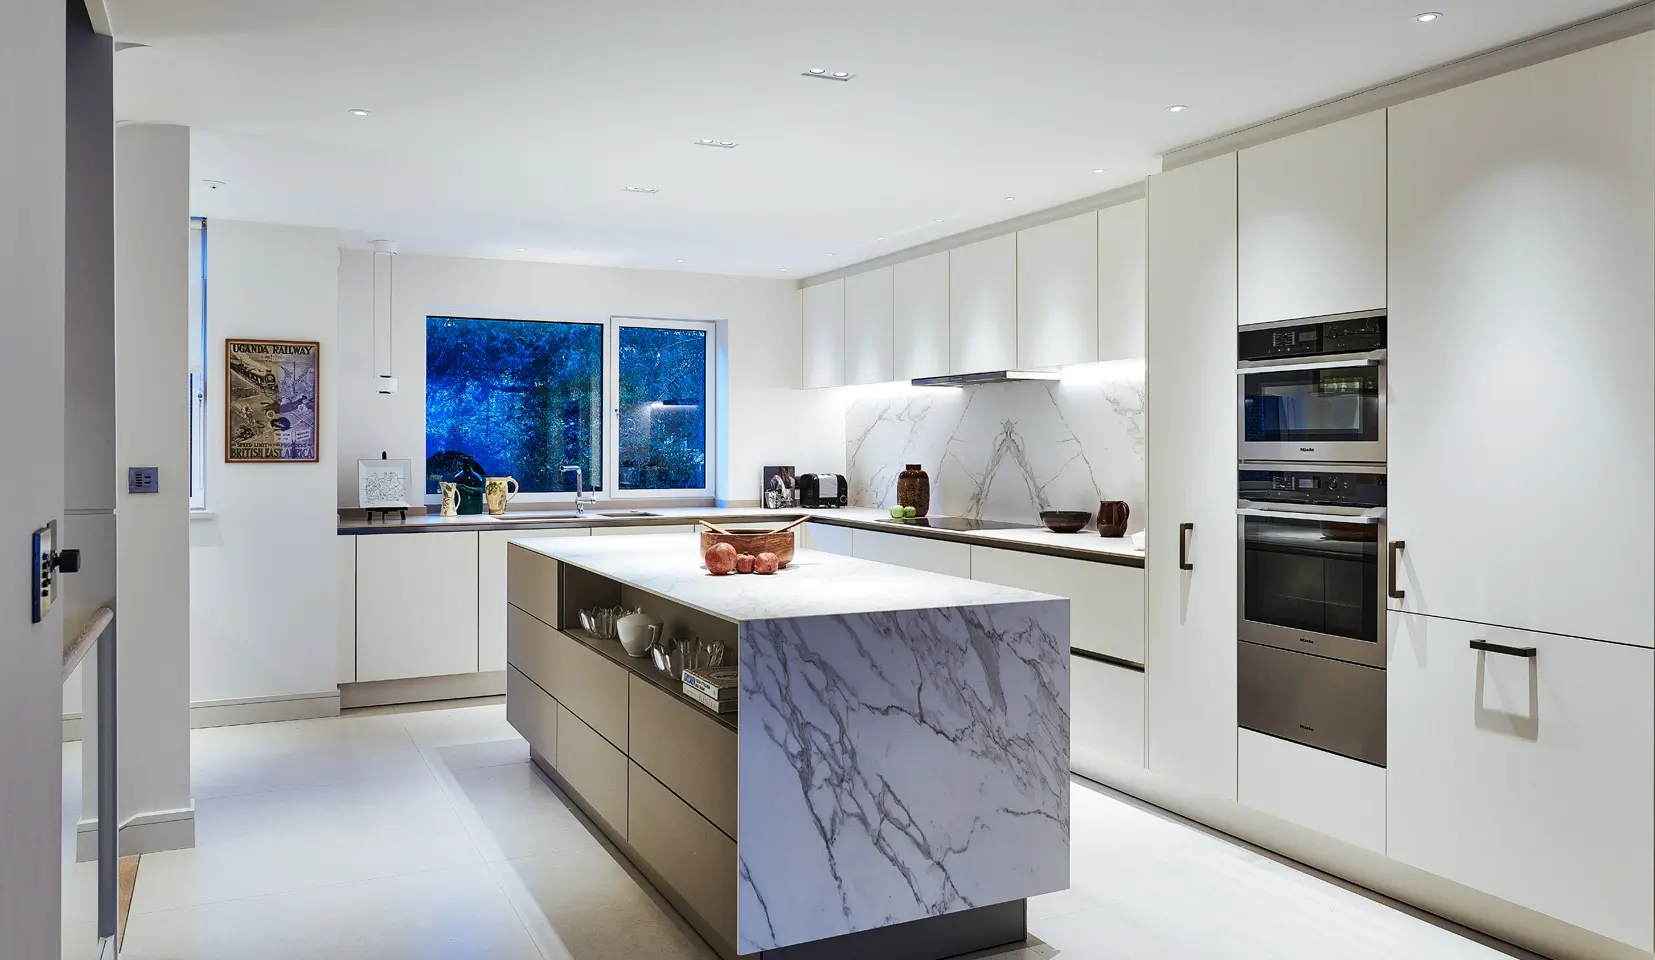 Brightly lit kitchen with marble island in centre